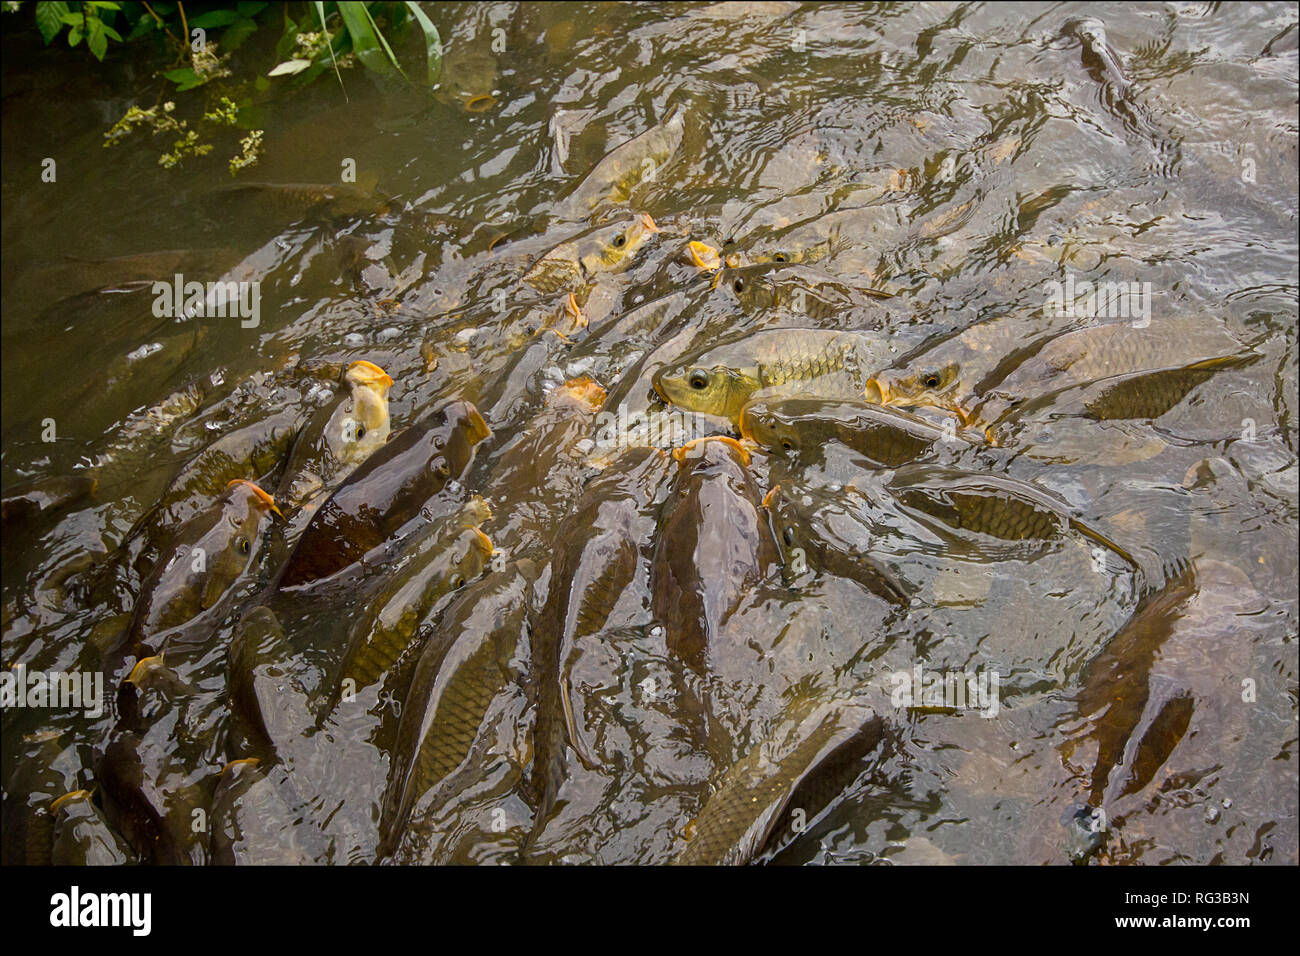 Carp (Cyprinus carpio) in a frenzy are swimming about after any food visitors throw in by a bridge. They are so tightly packed they fill the lake. Stock Photo